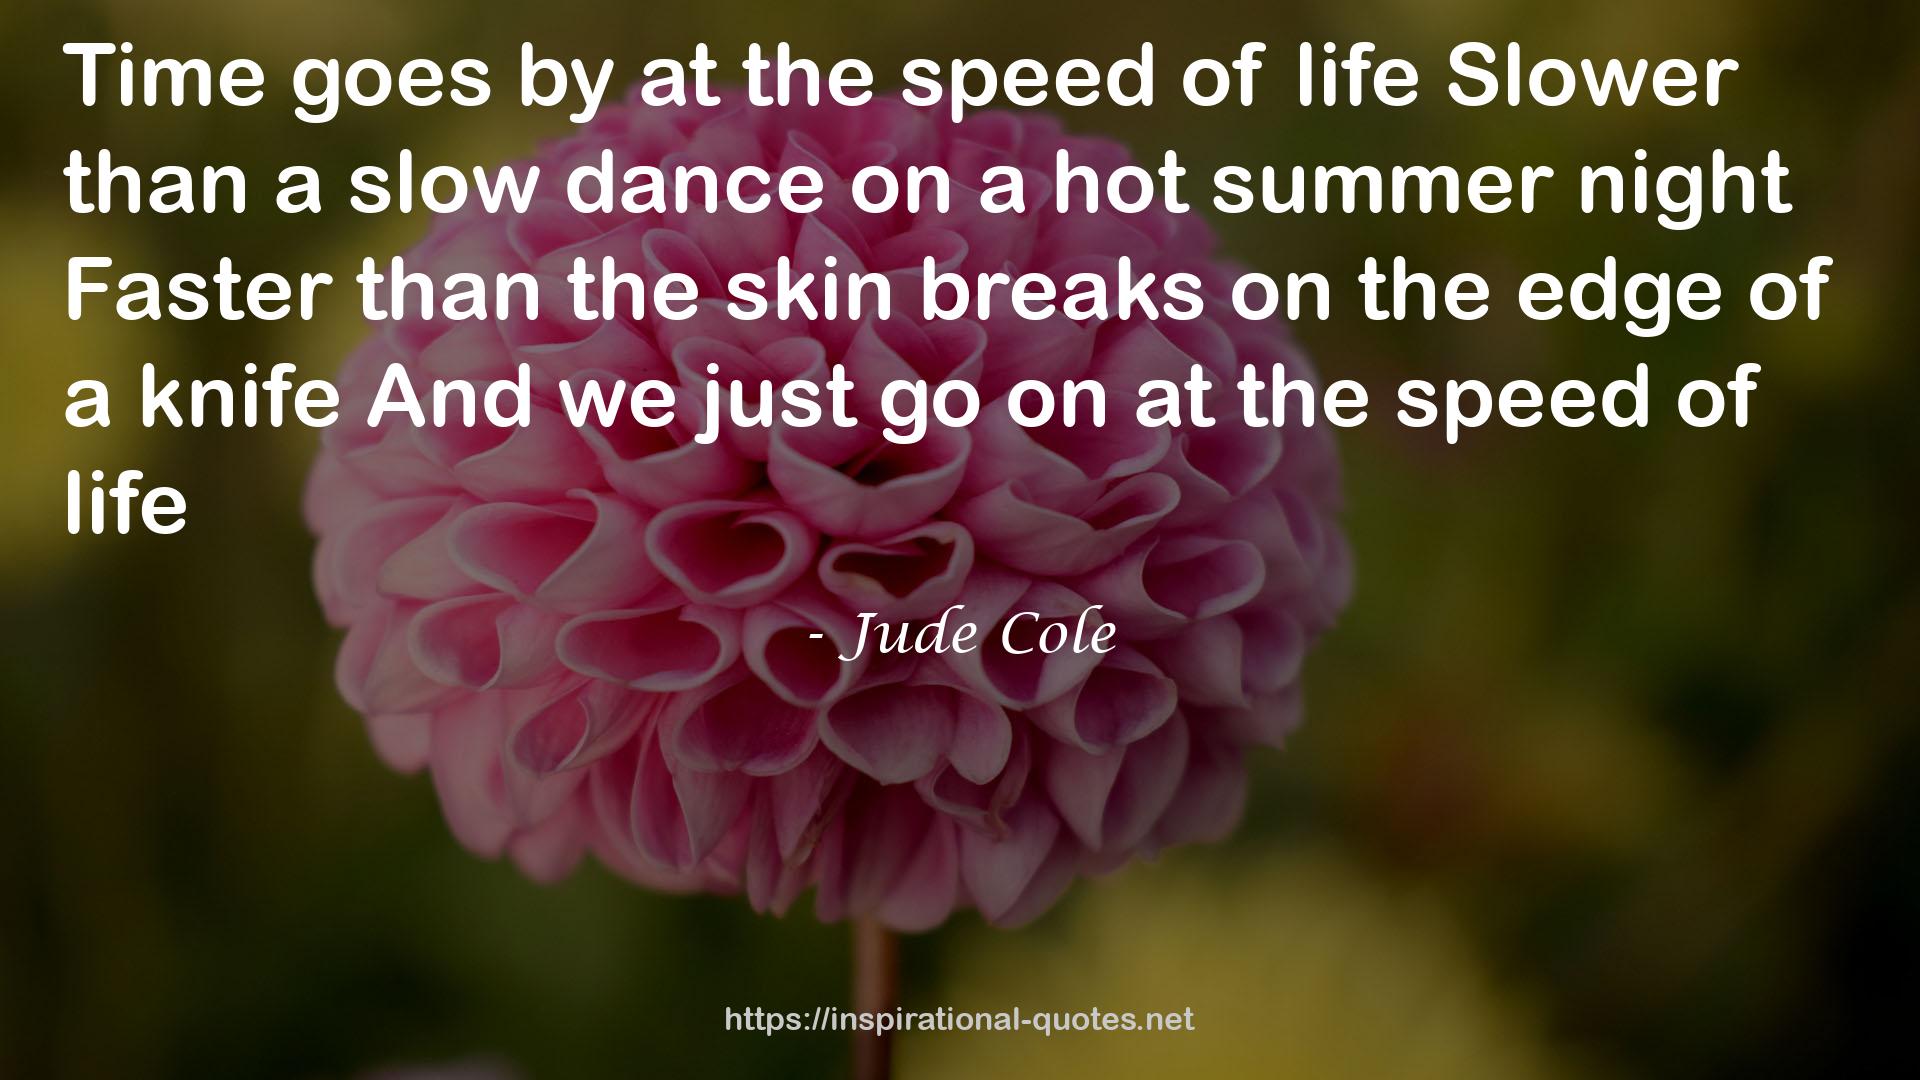 Jude Cole QUOTES